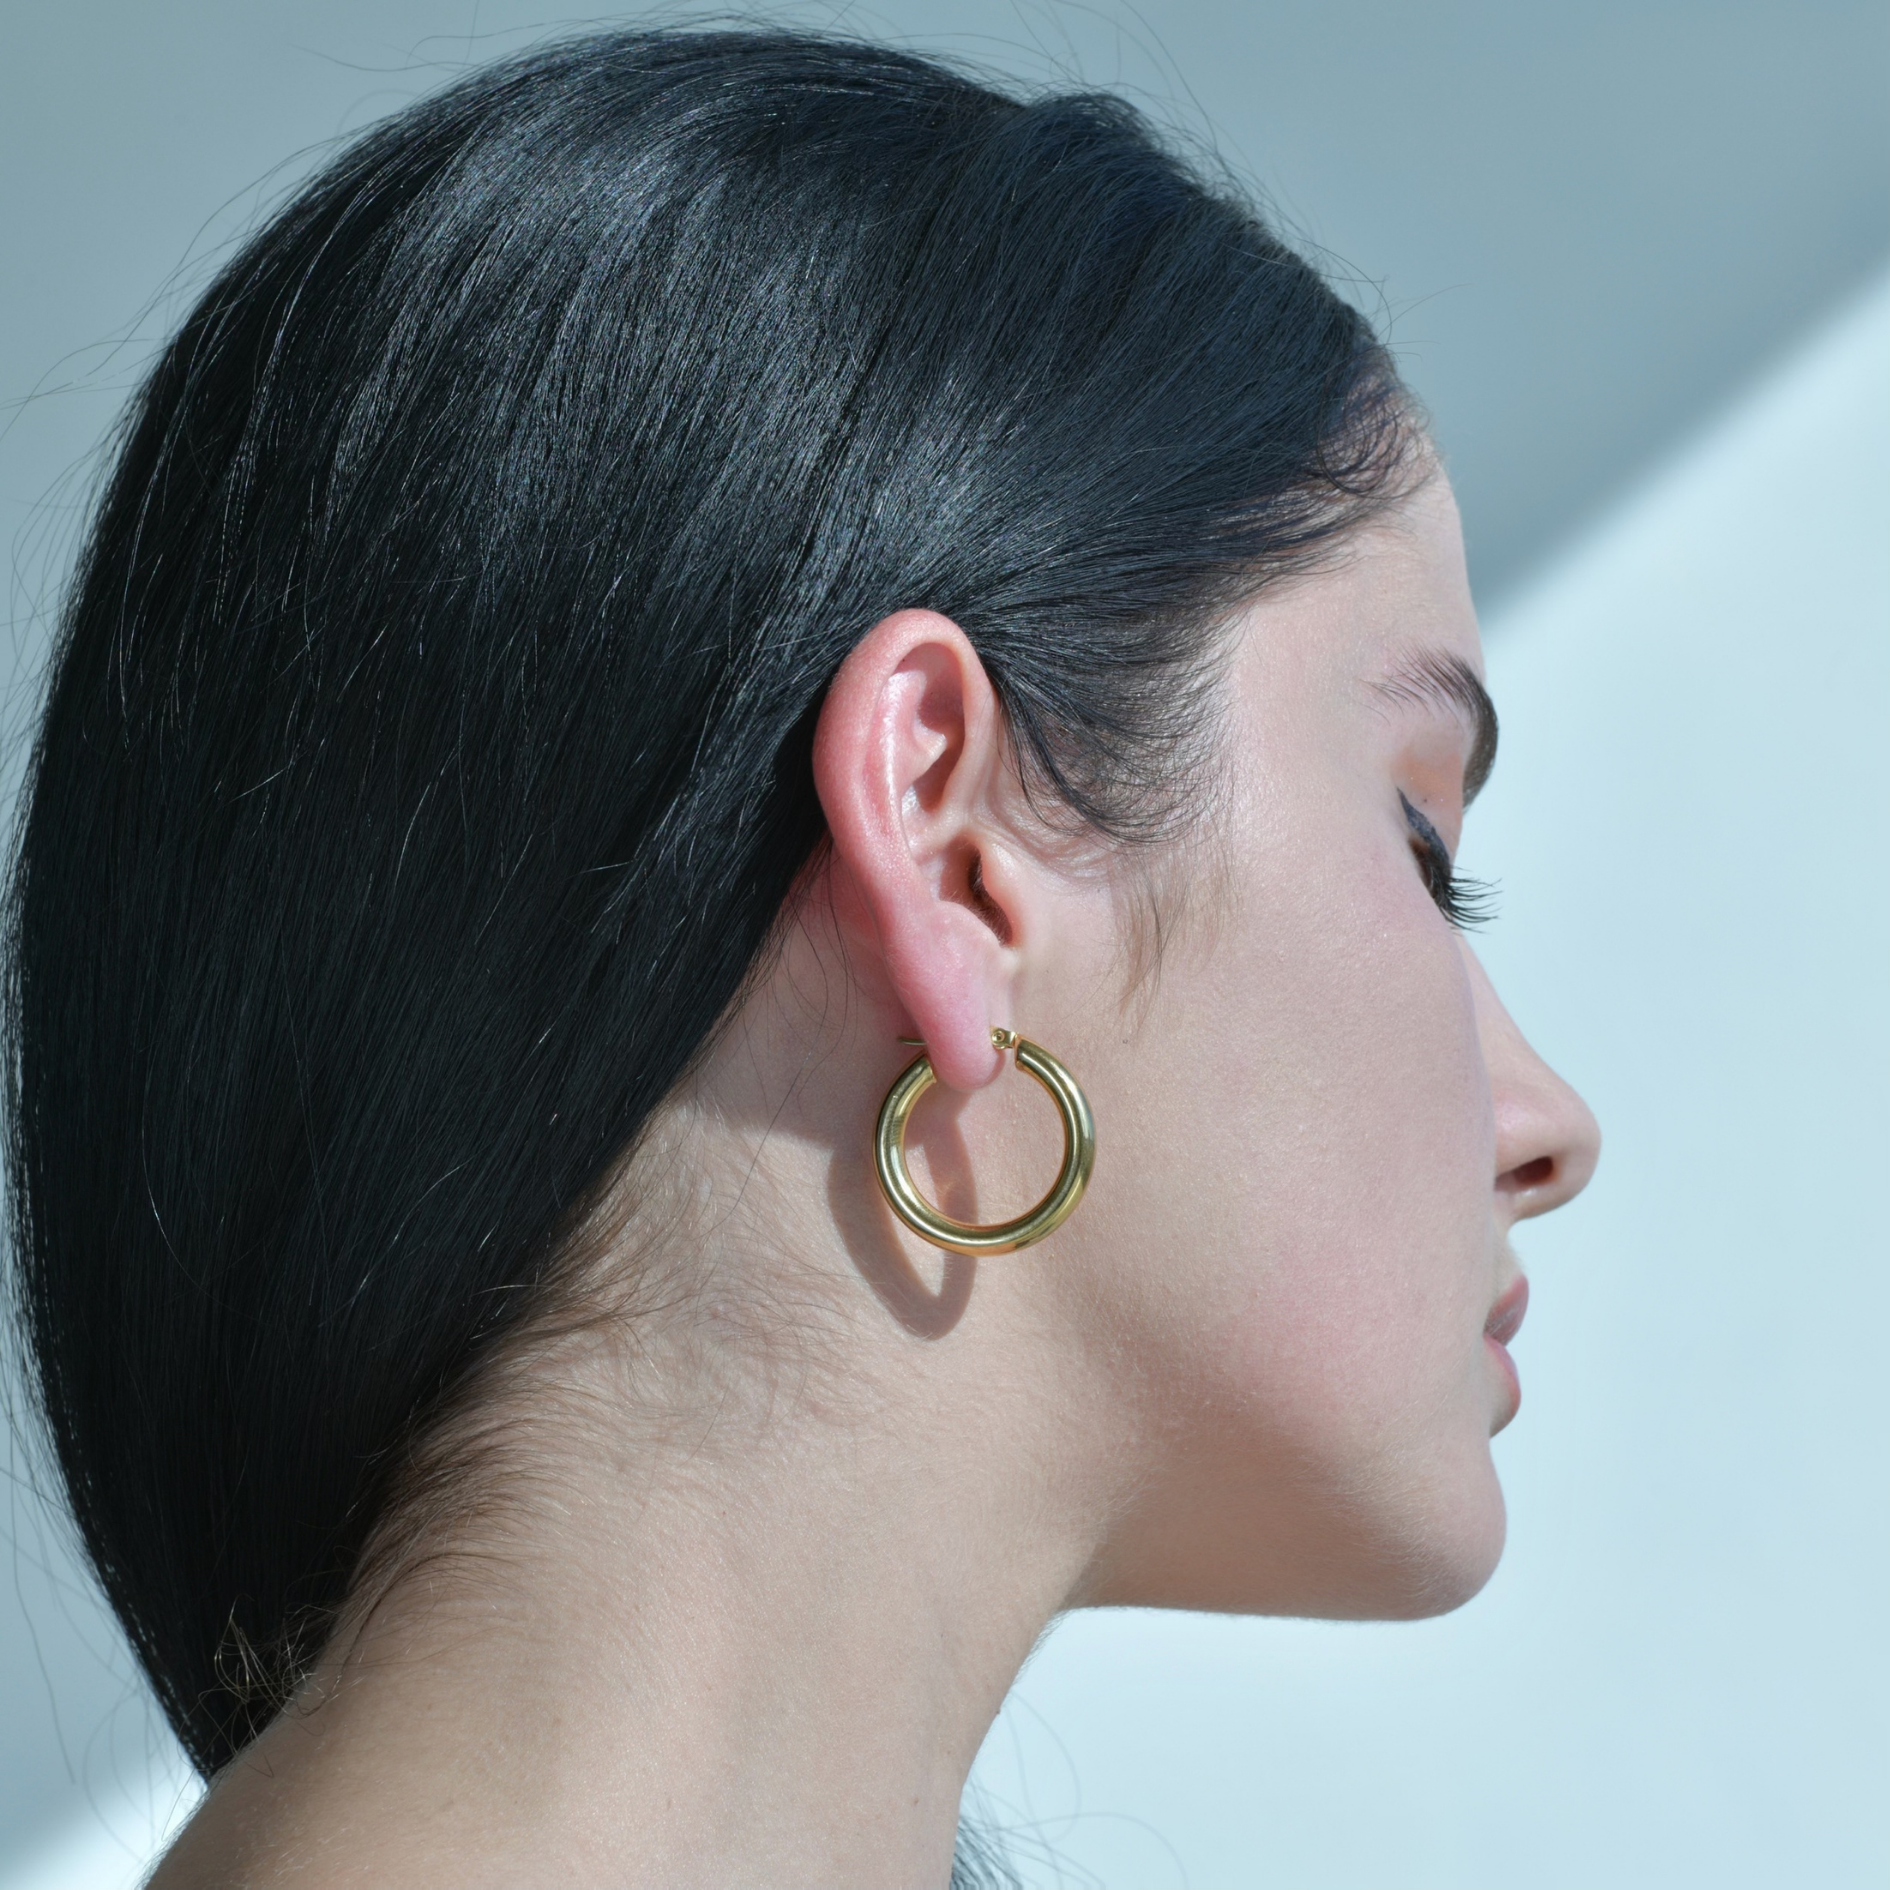 Woman model wearing Gold plated hoops. Round circle earrings plated in gold.